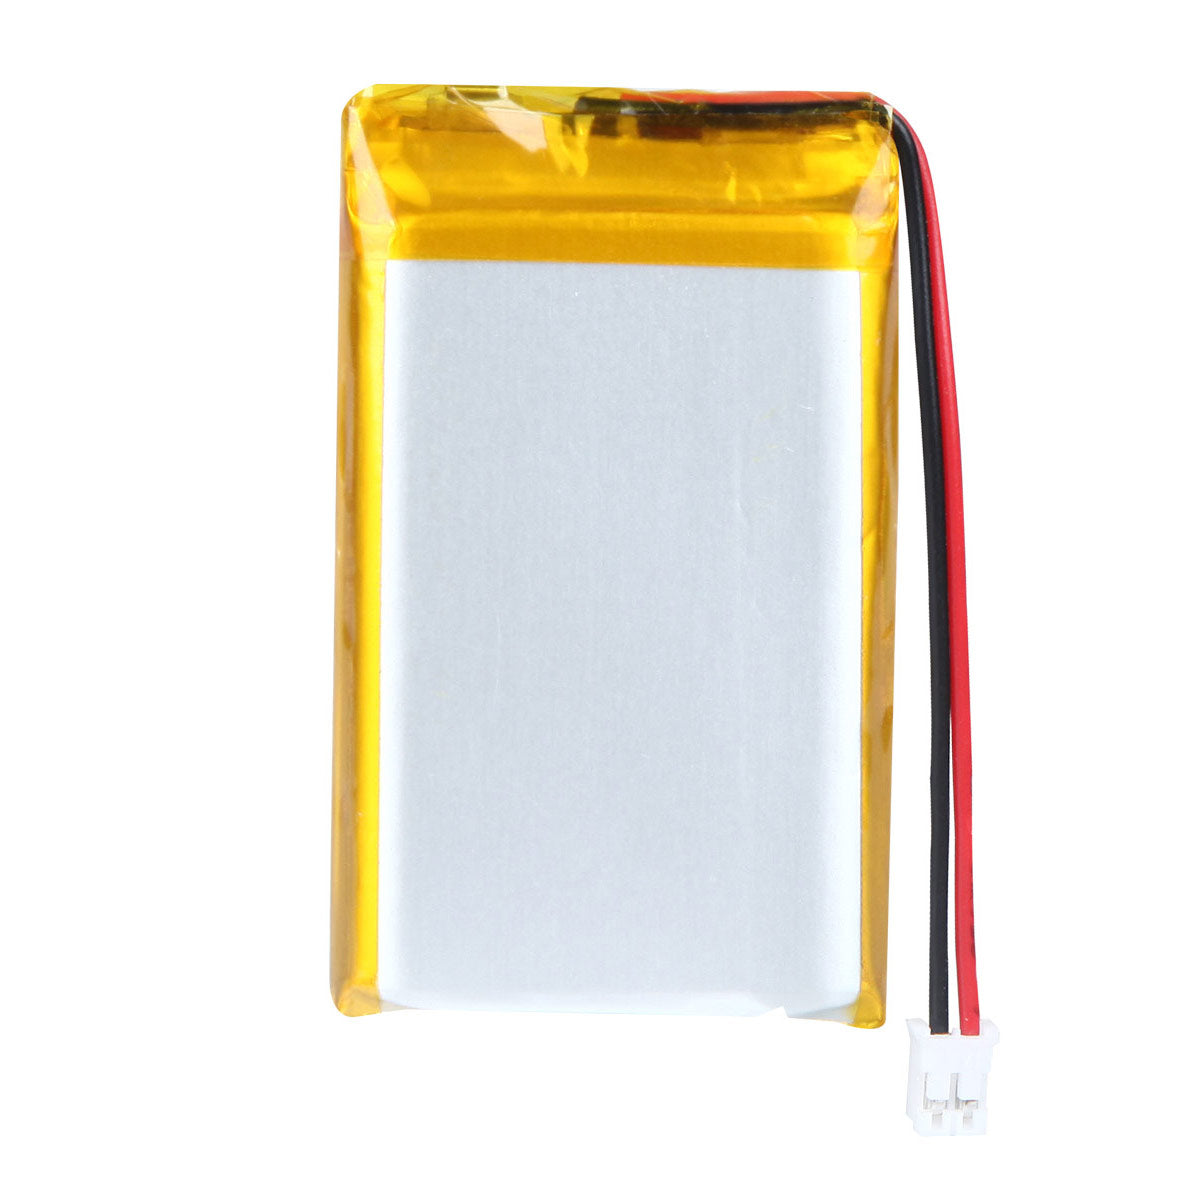 3.7V 703048 1000mAh Rechargeable Lithium Polymer Battery